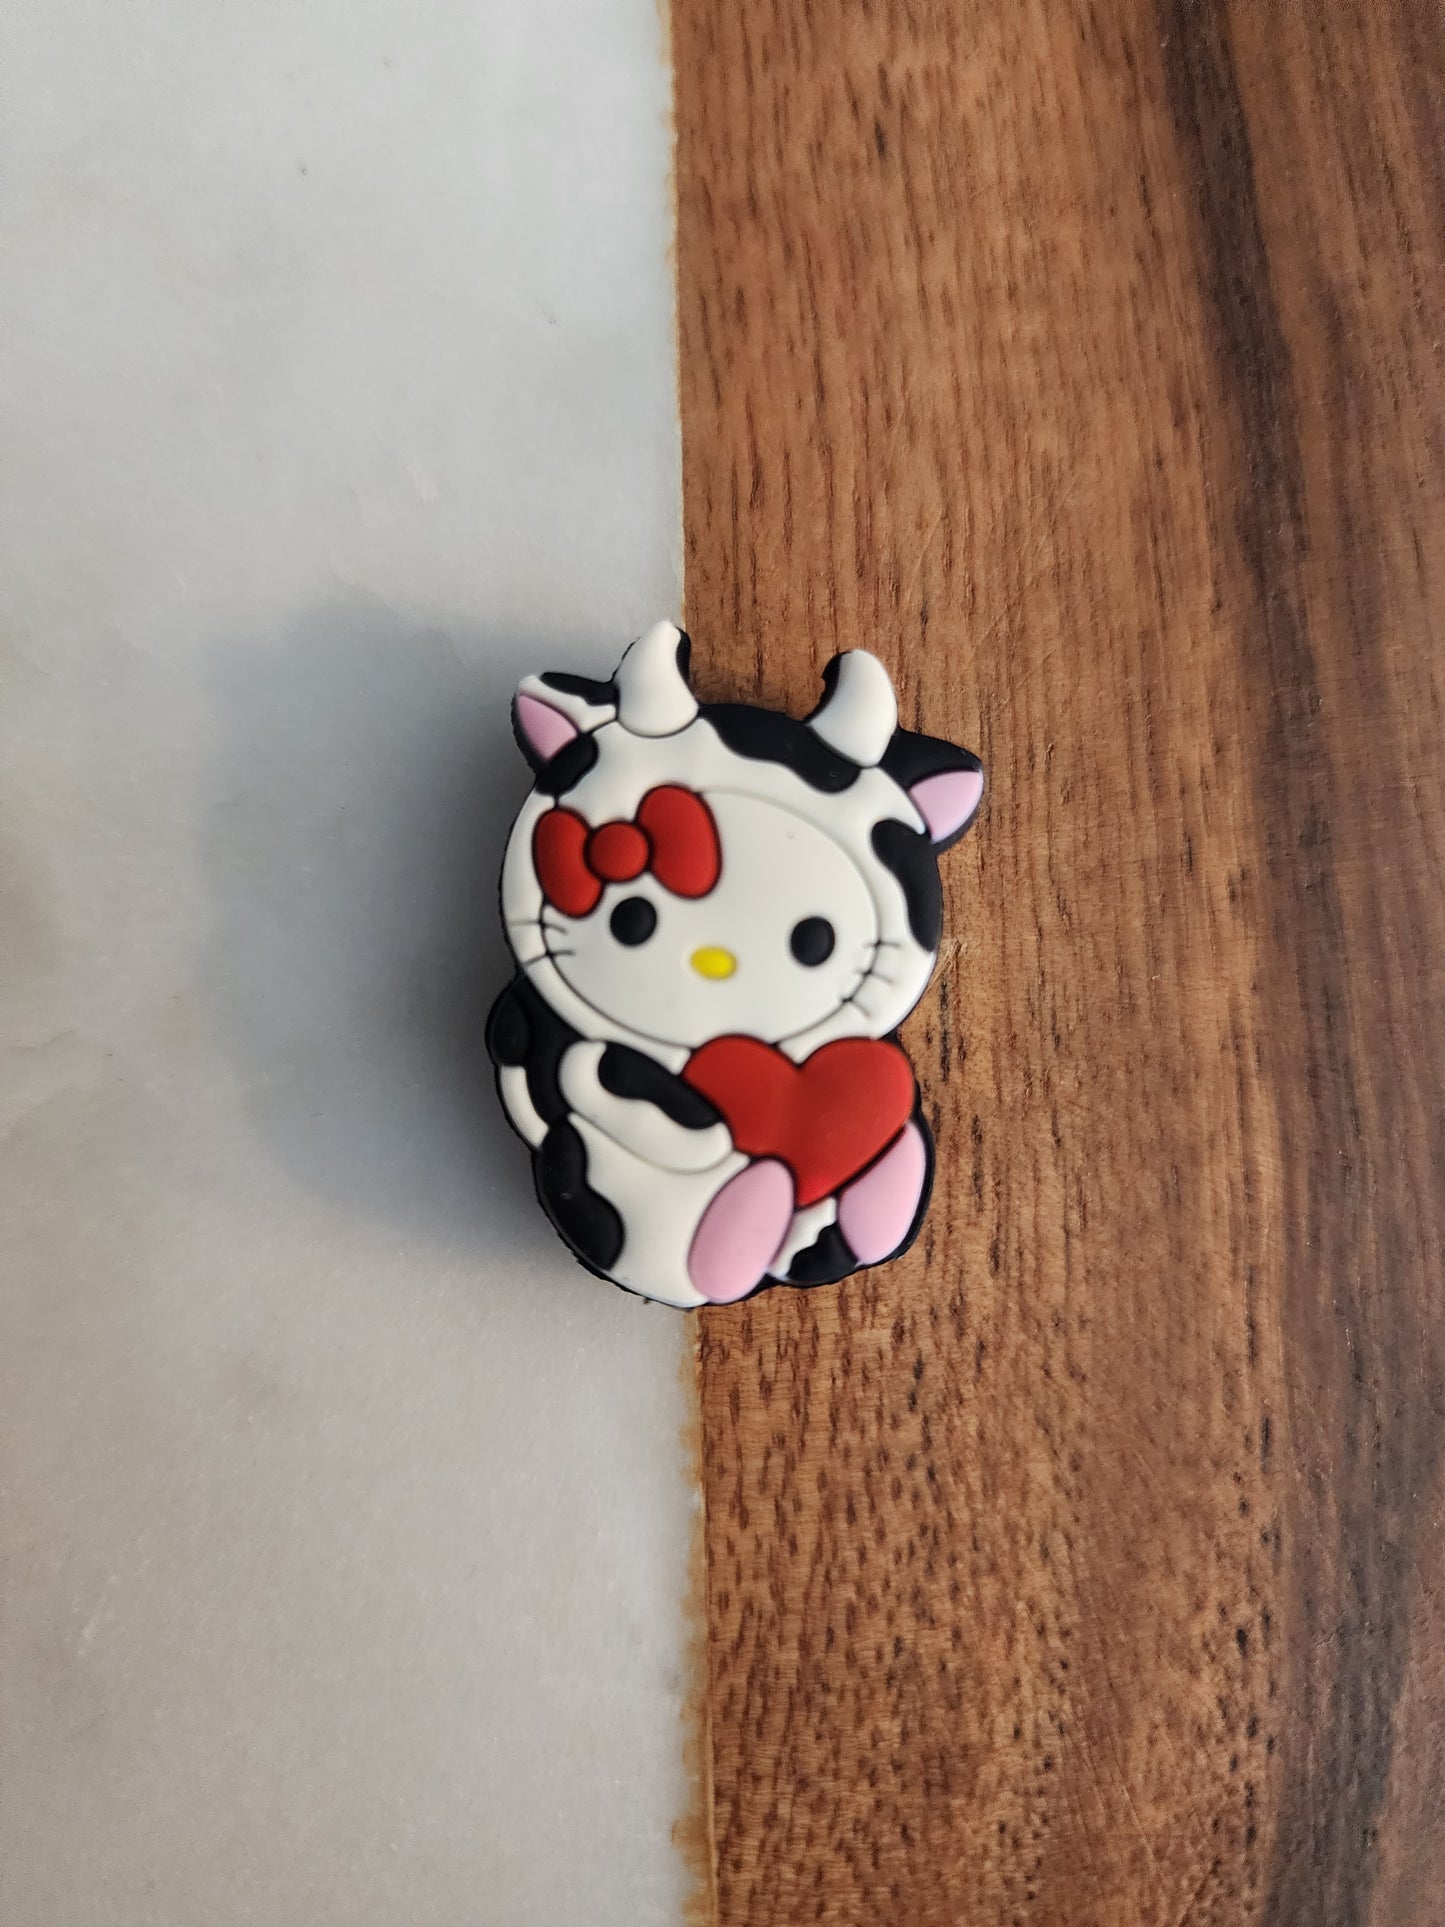 Silicone focal bead kitty in cow costume with heart